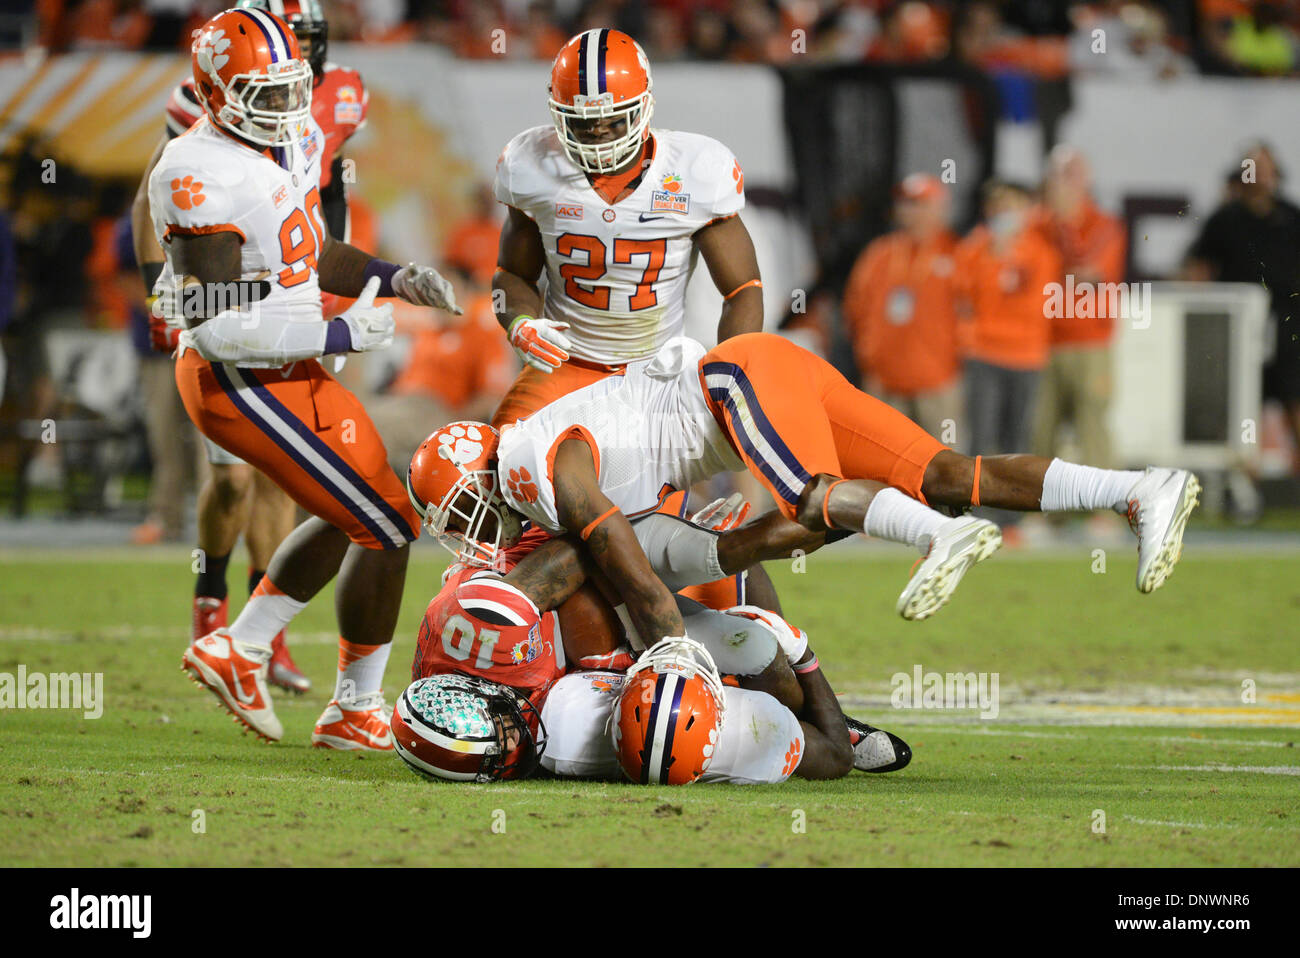 January 3 14 Jayron Kearse And Bashaud Breeland 17 Of Clemson Tackle Corey Brown 10 Of Ohio State During The Ncaa Football Game Between The Clemson Tigers And The Ohio State